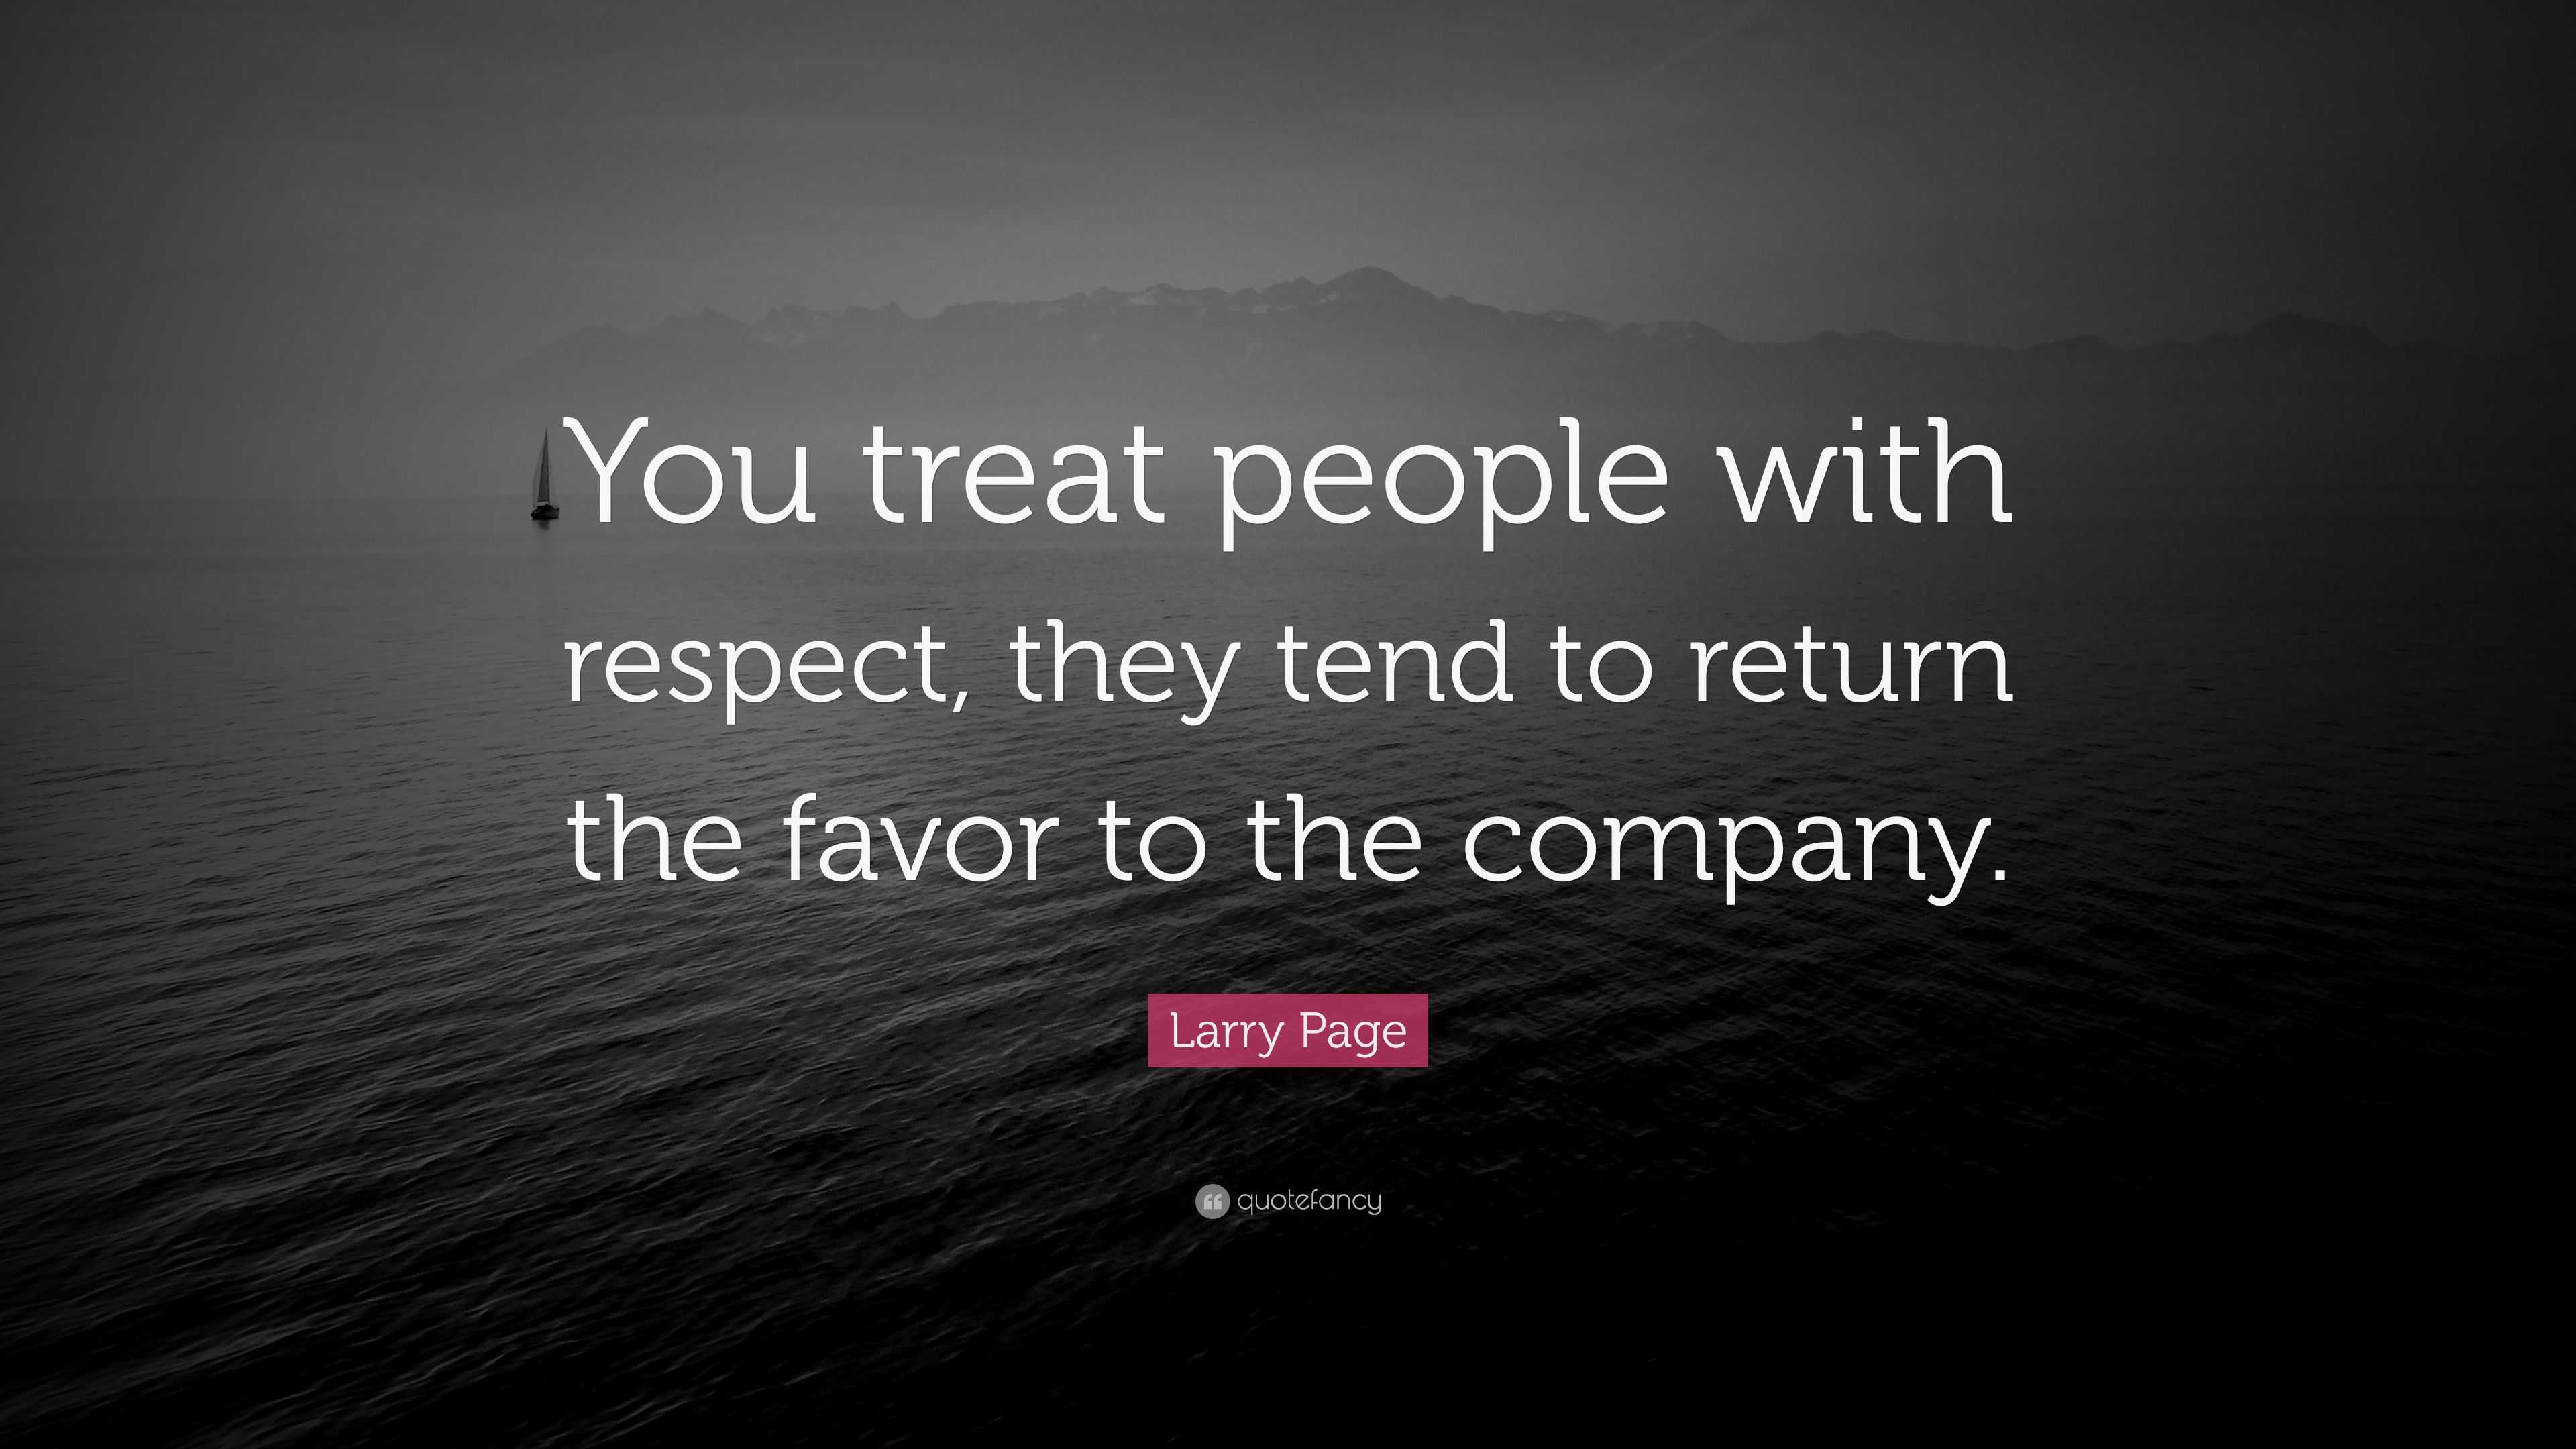 You treat people with respect, they tend to return the favor to the company...